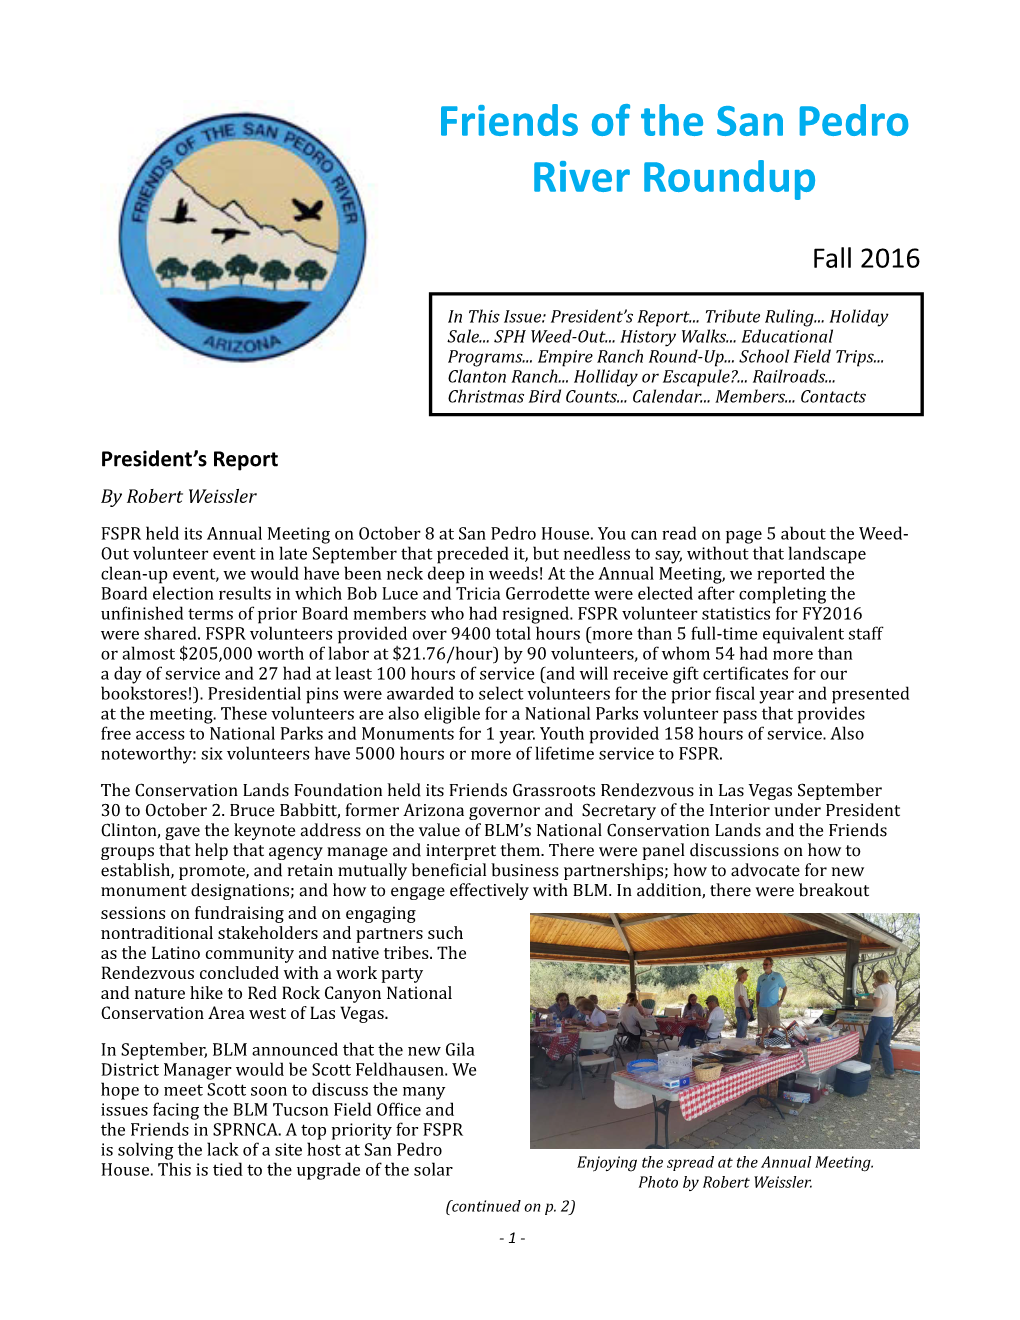 Friends of the San Pedro River Roundup